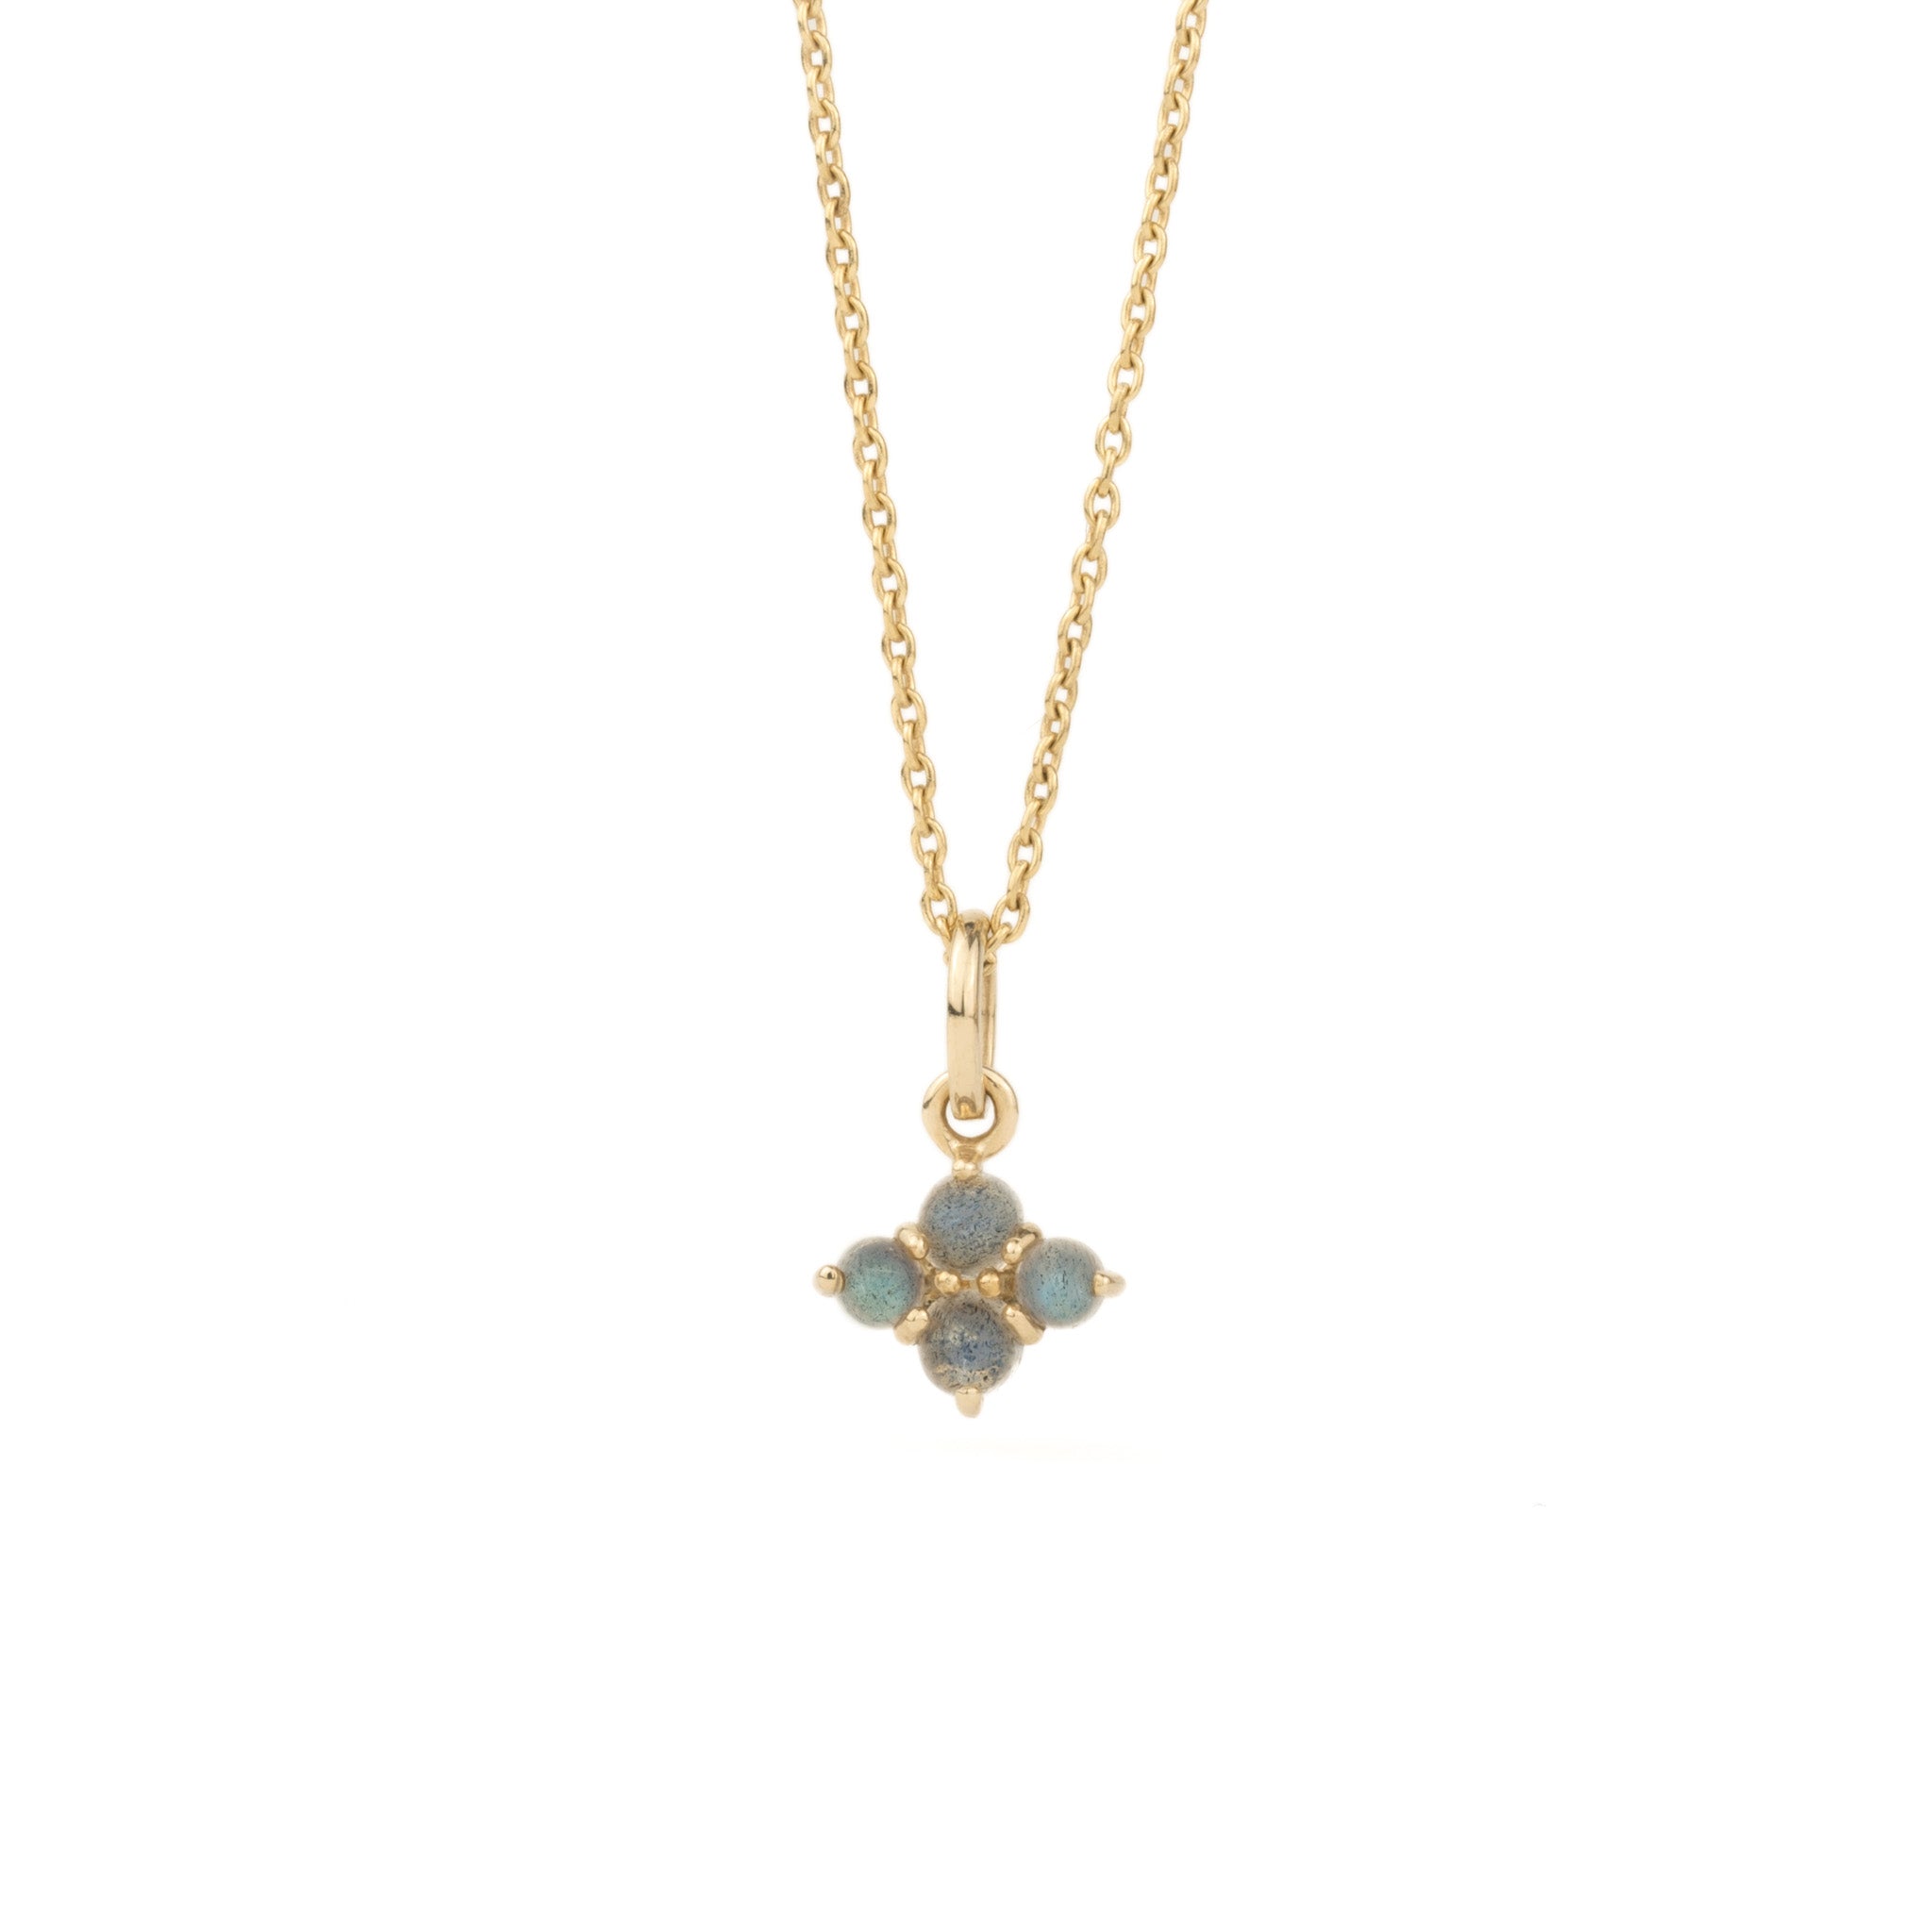 An Aiden Jae Sunrise Charm Necklace with a cross on it.